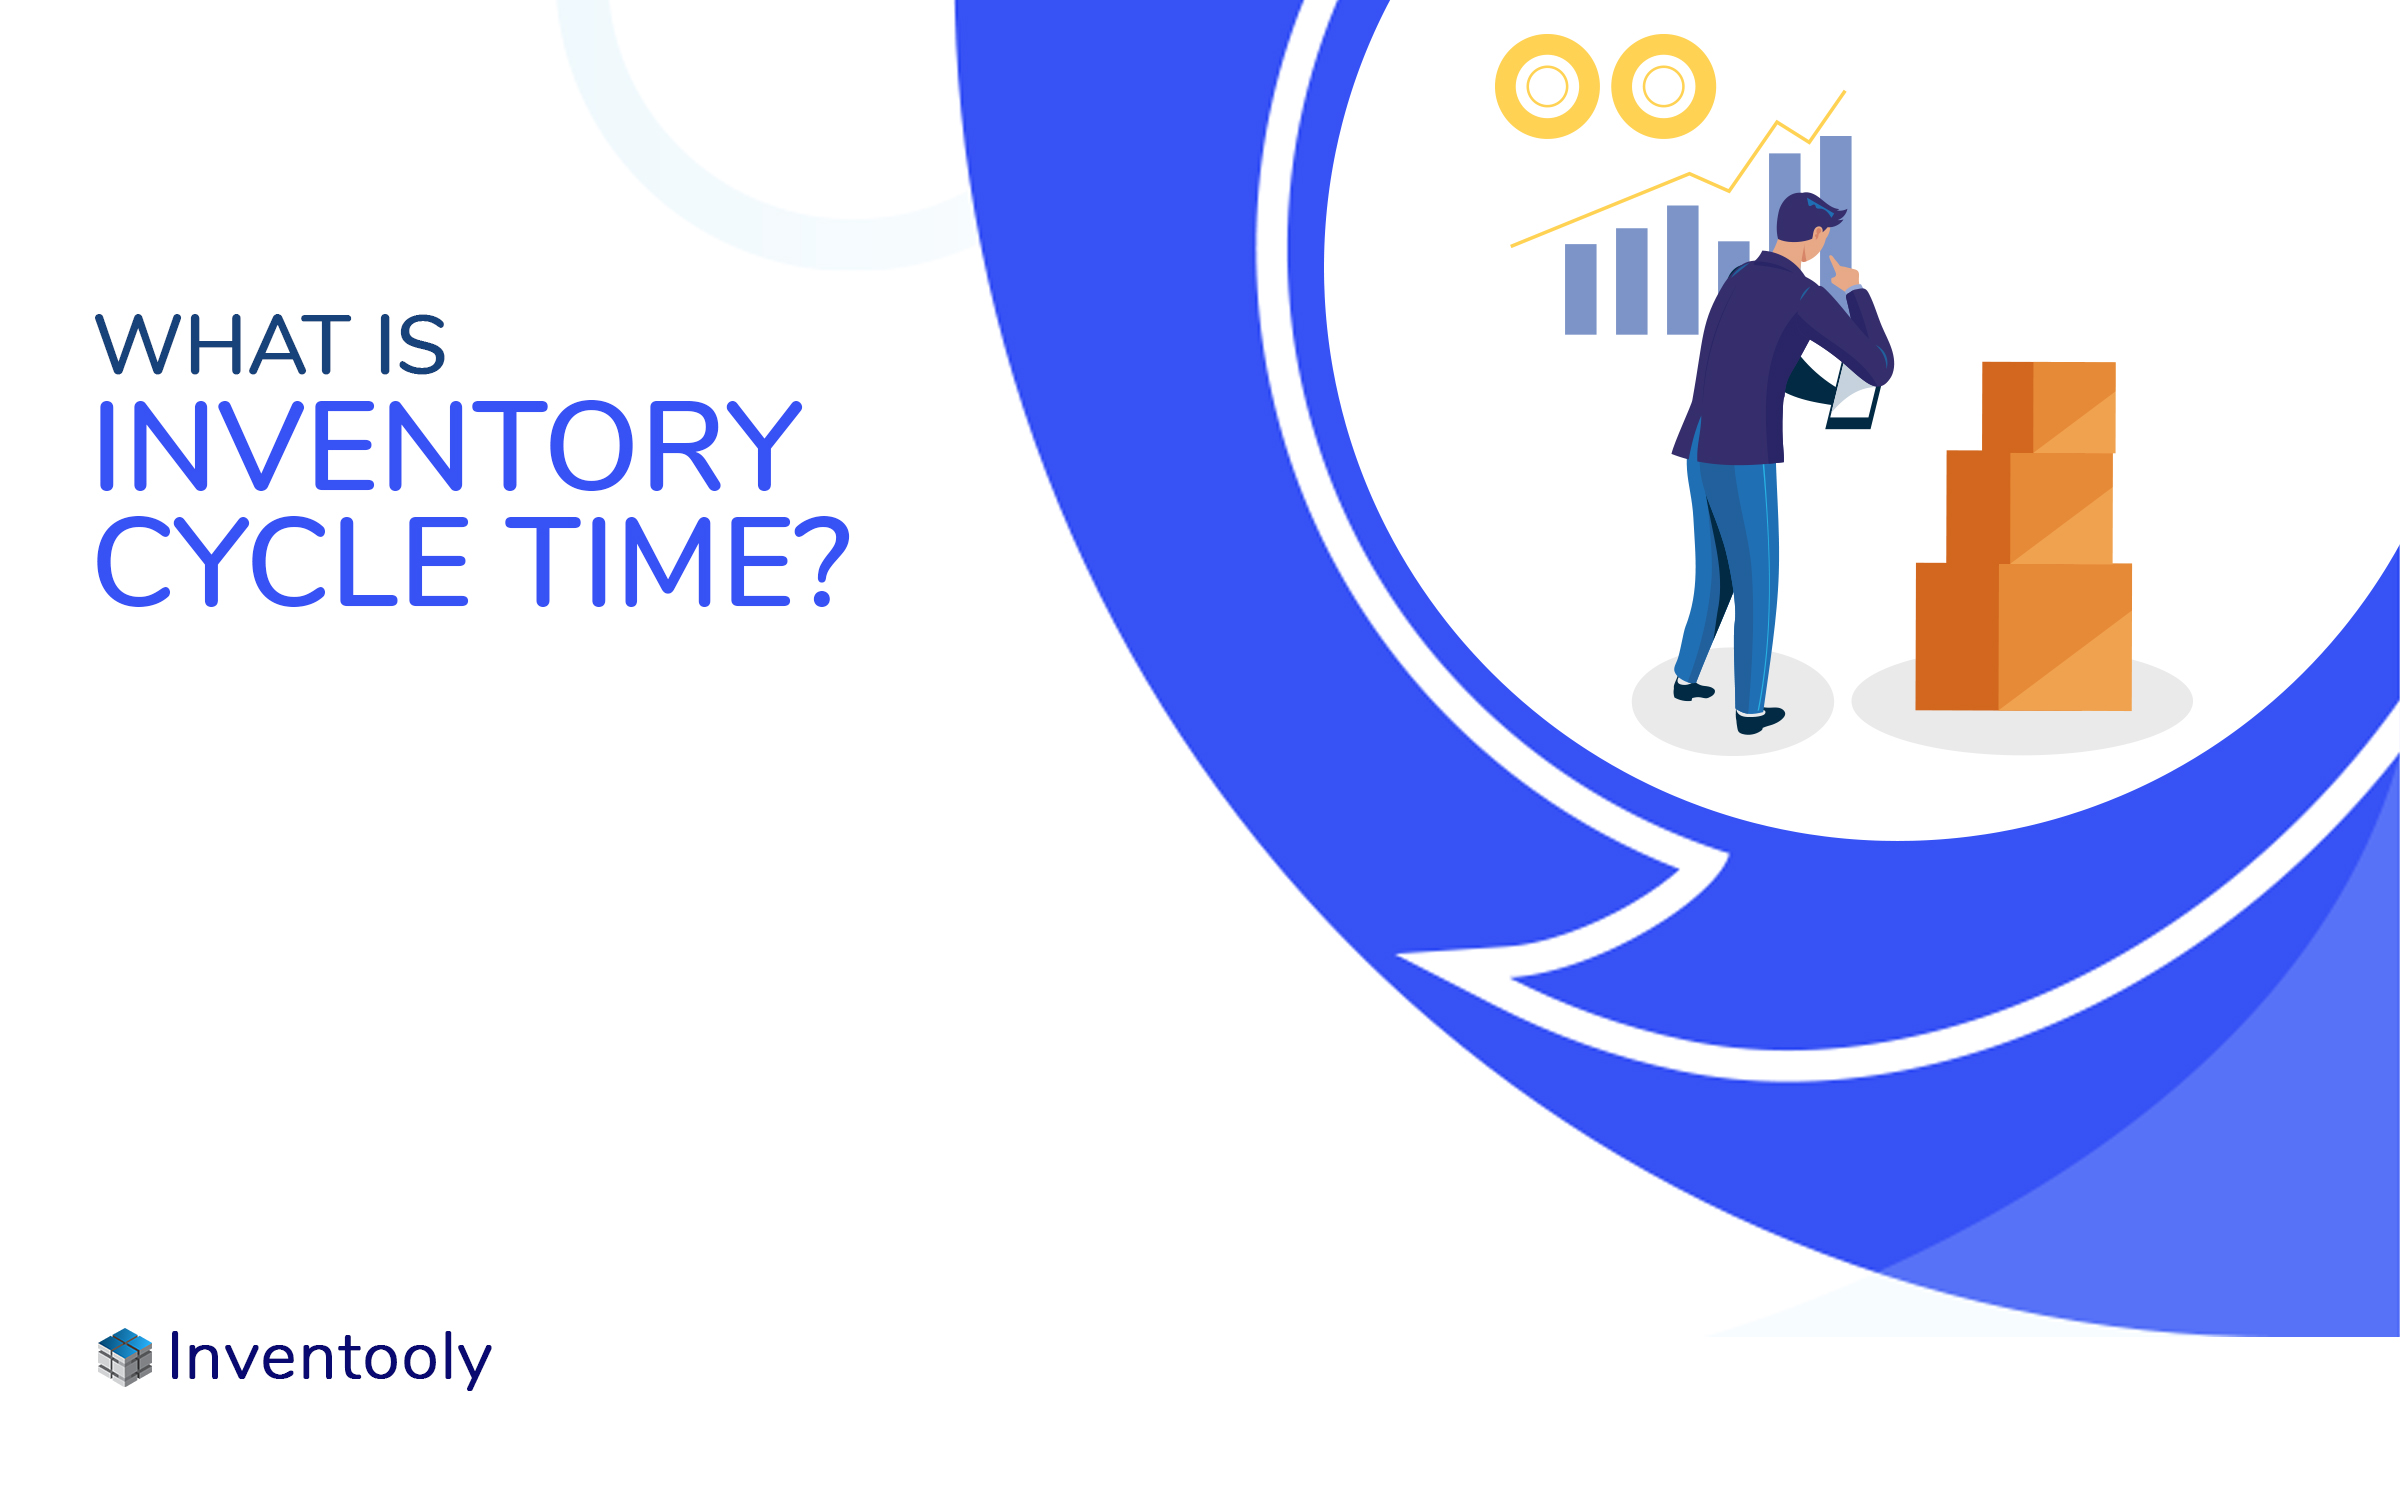 What is the inventory cycle time?